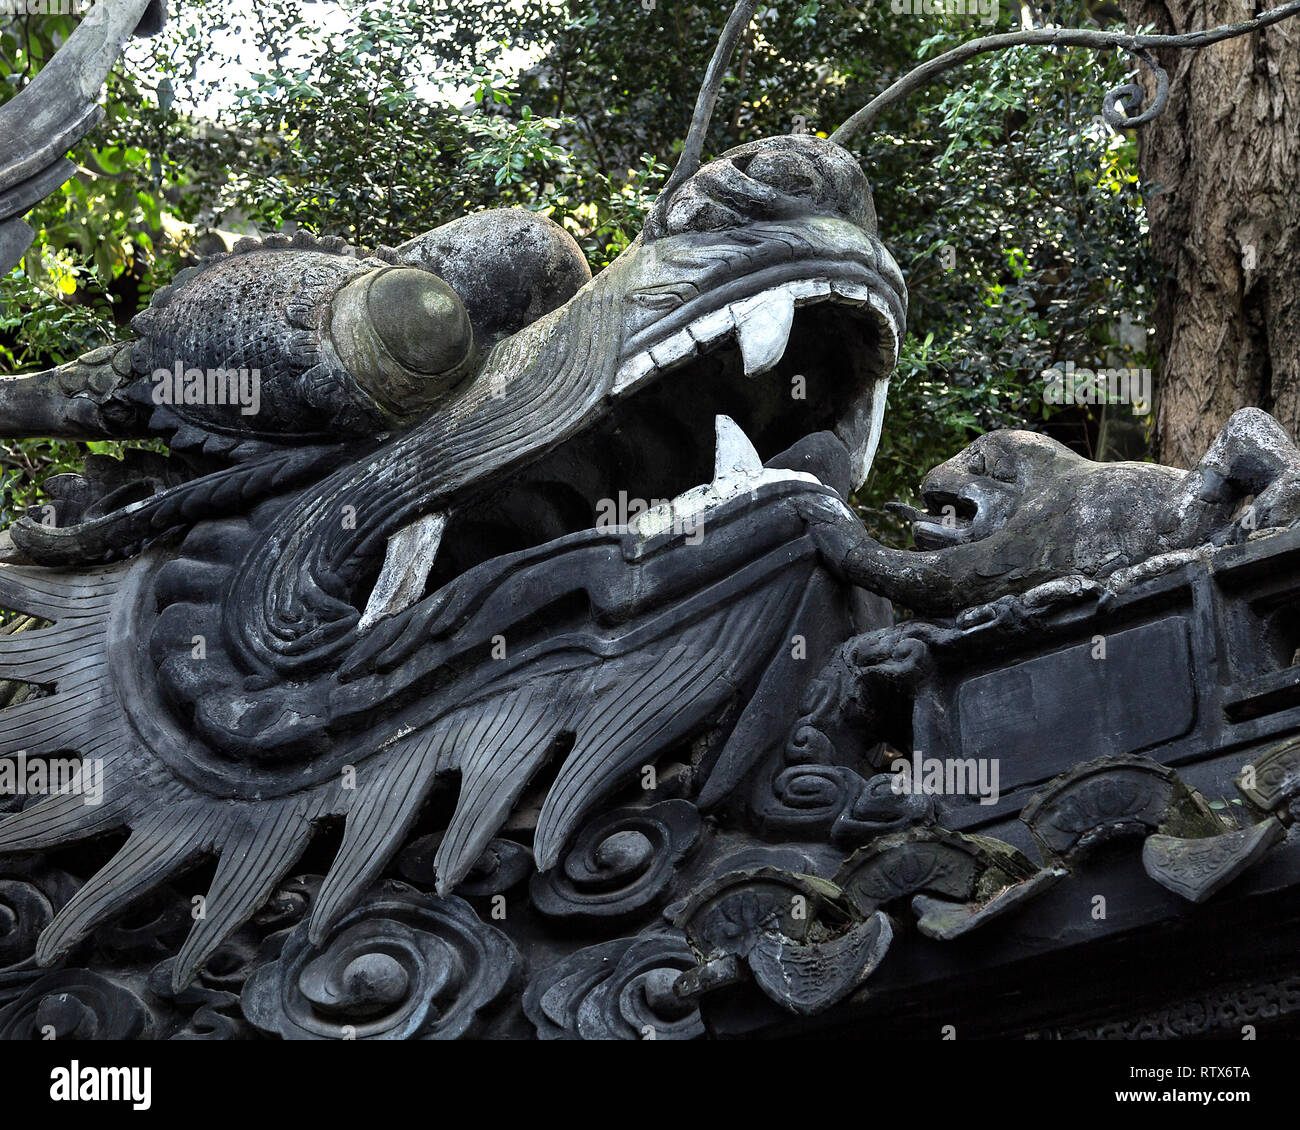 Detail of a dragon wall in Yu Garden, Old Shanghai. The sculpture features a dragon head and a toad representing auspicious power, luck and longevity. Stock Photo